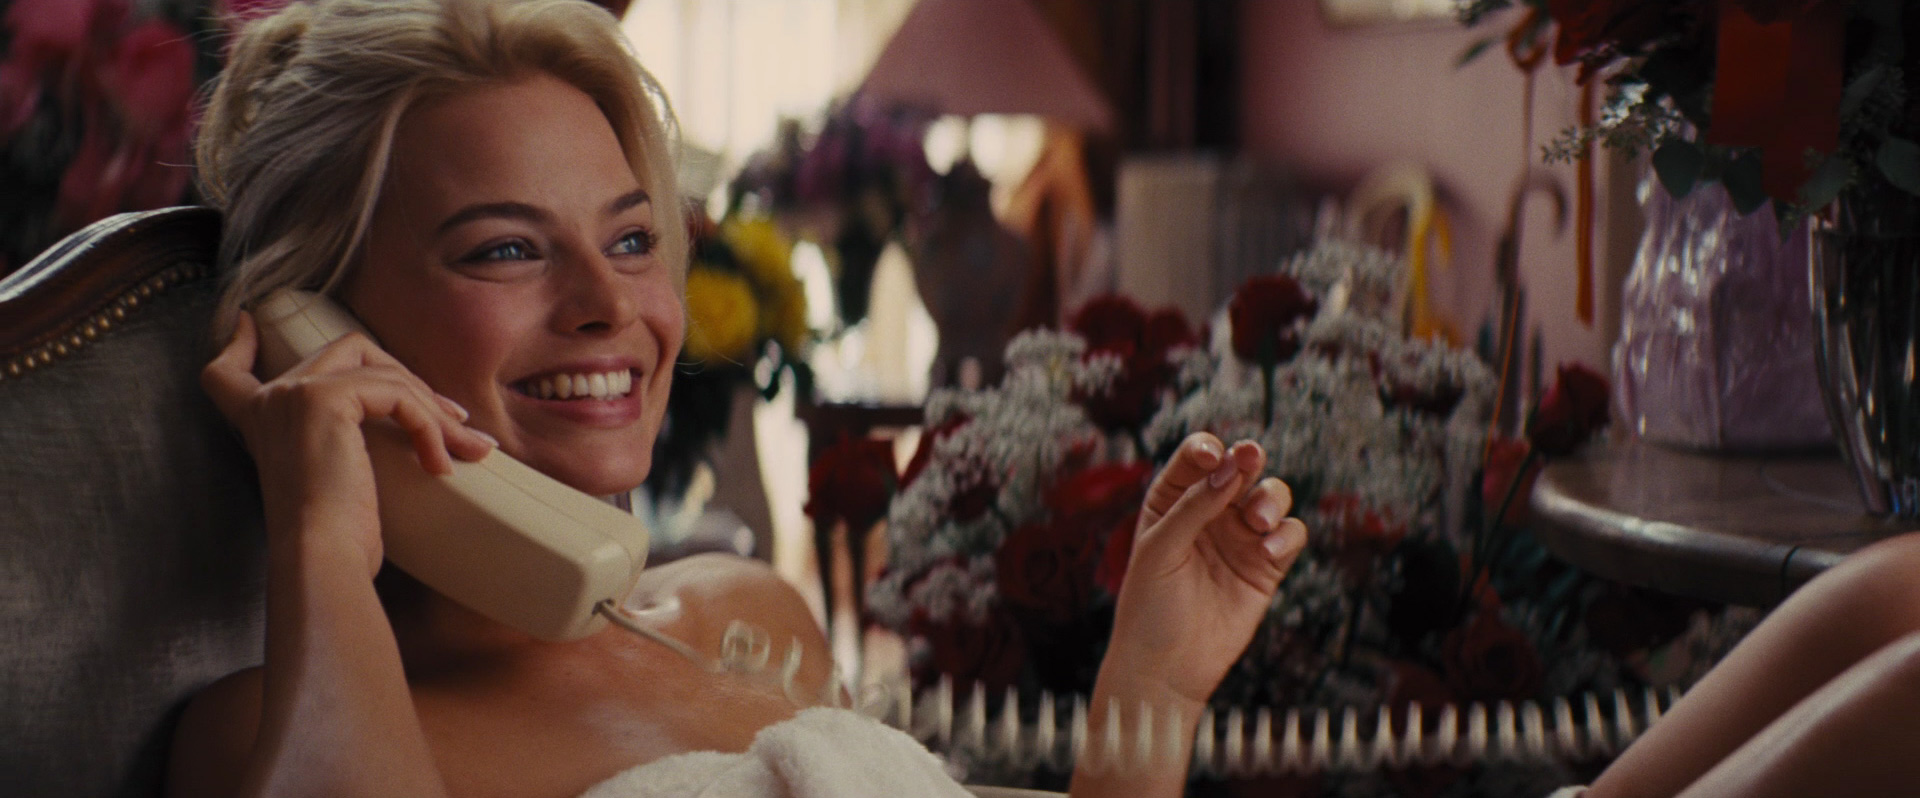 Margot Robbie, Naomi in The Wolf of Wall Street